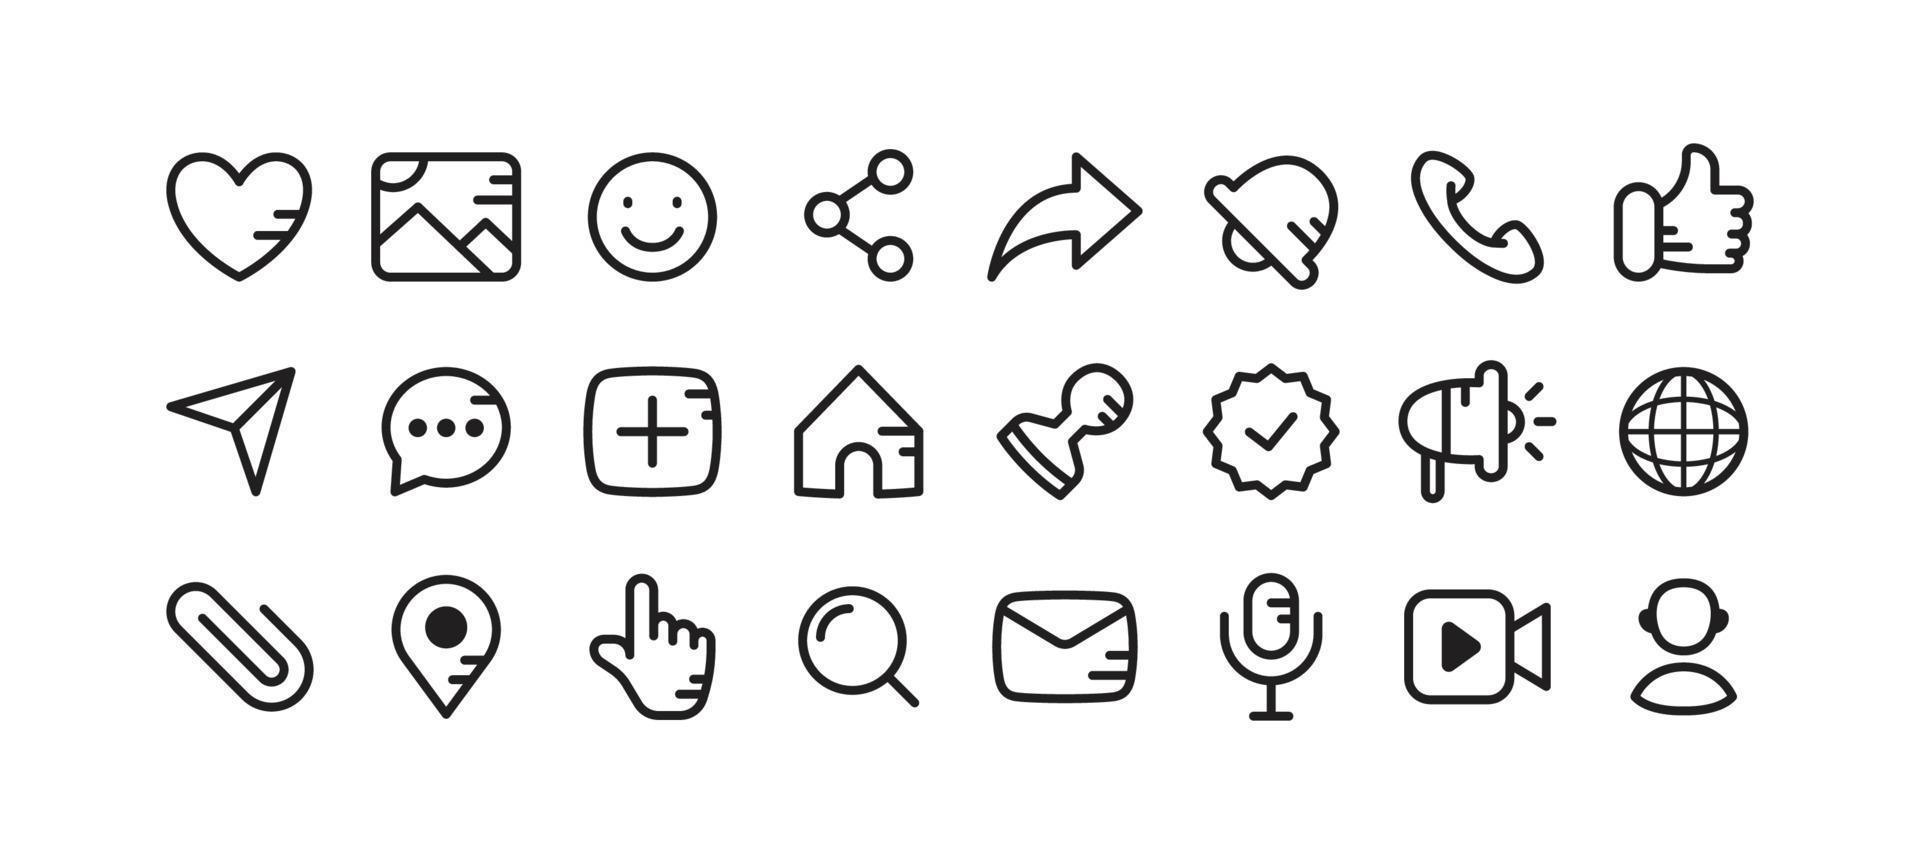 Cute Action and Reaction Social media Icon Set with Outline Style ...